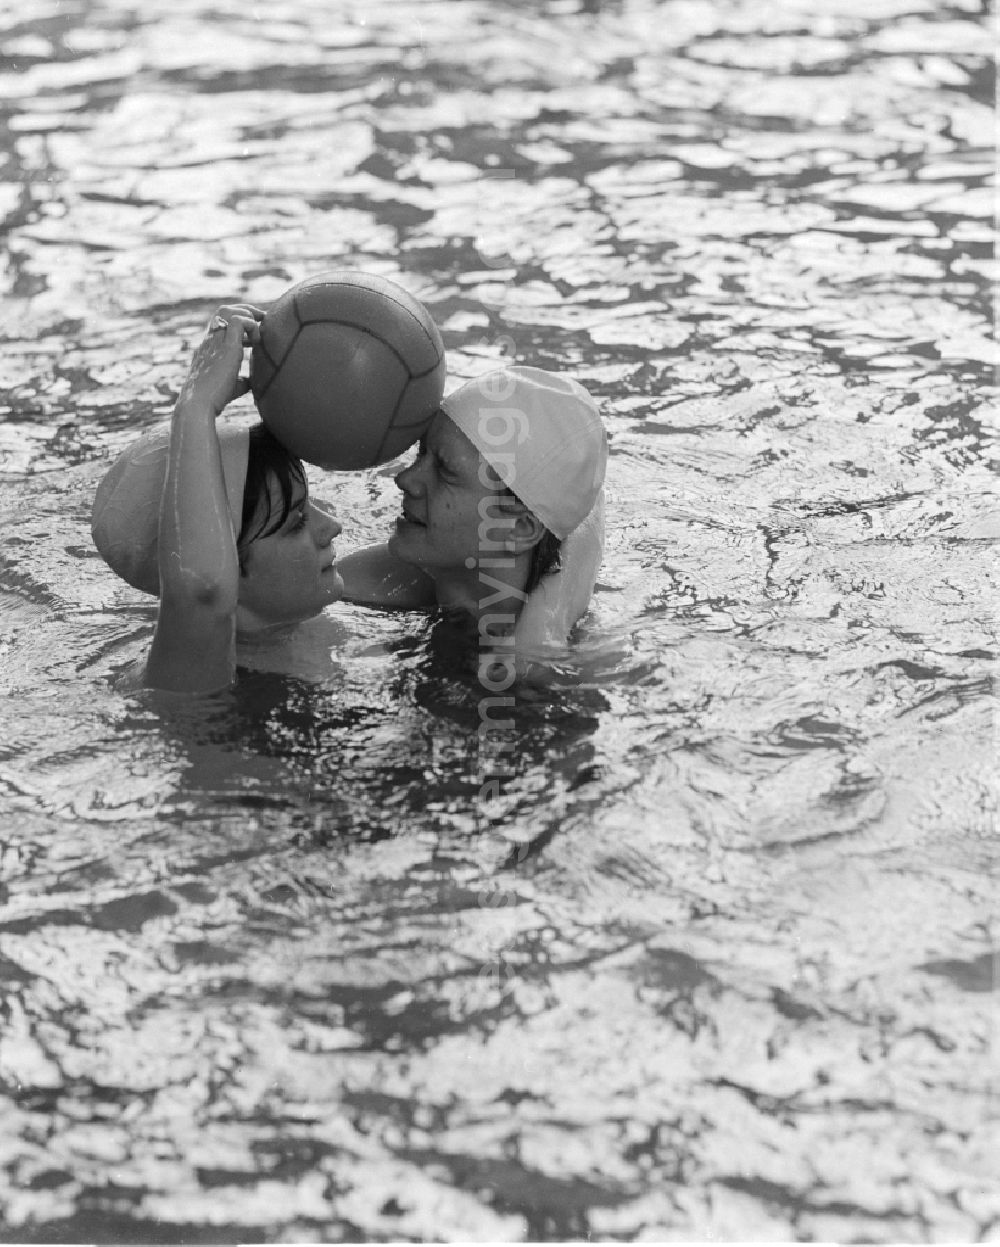 GDR photo archive: Berlin - Young couple in the water in Berlin